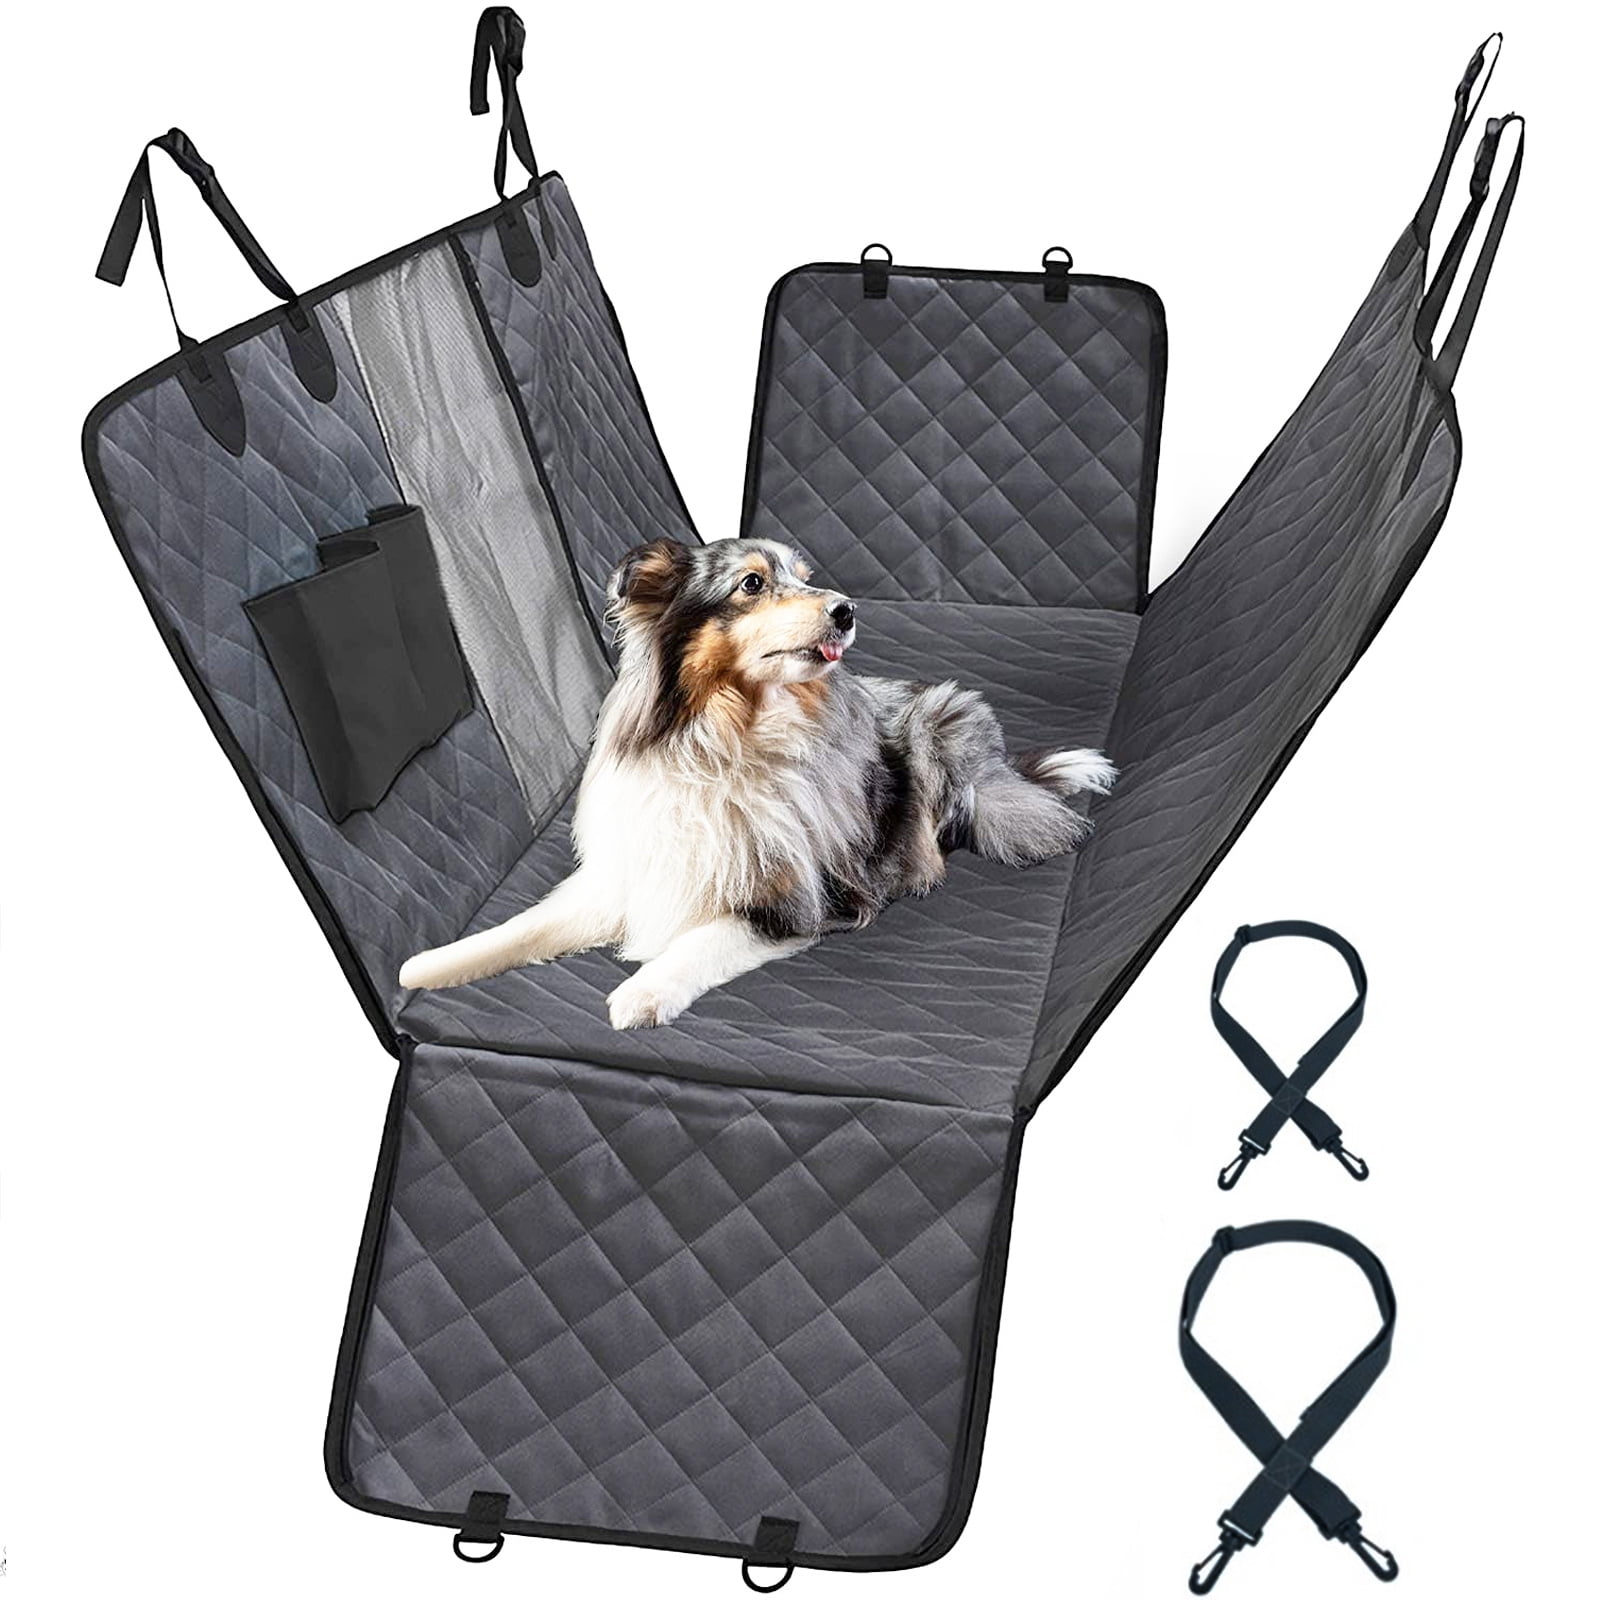 Black Dog Seat Covers Scratch Hammock Vehicle Door Protector For Dogs Pet  Cover From Concerweek, $18.43